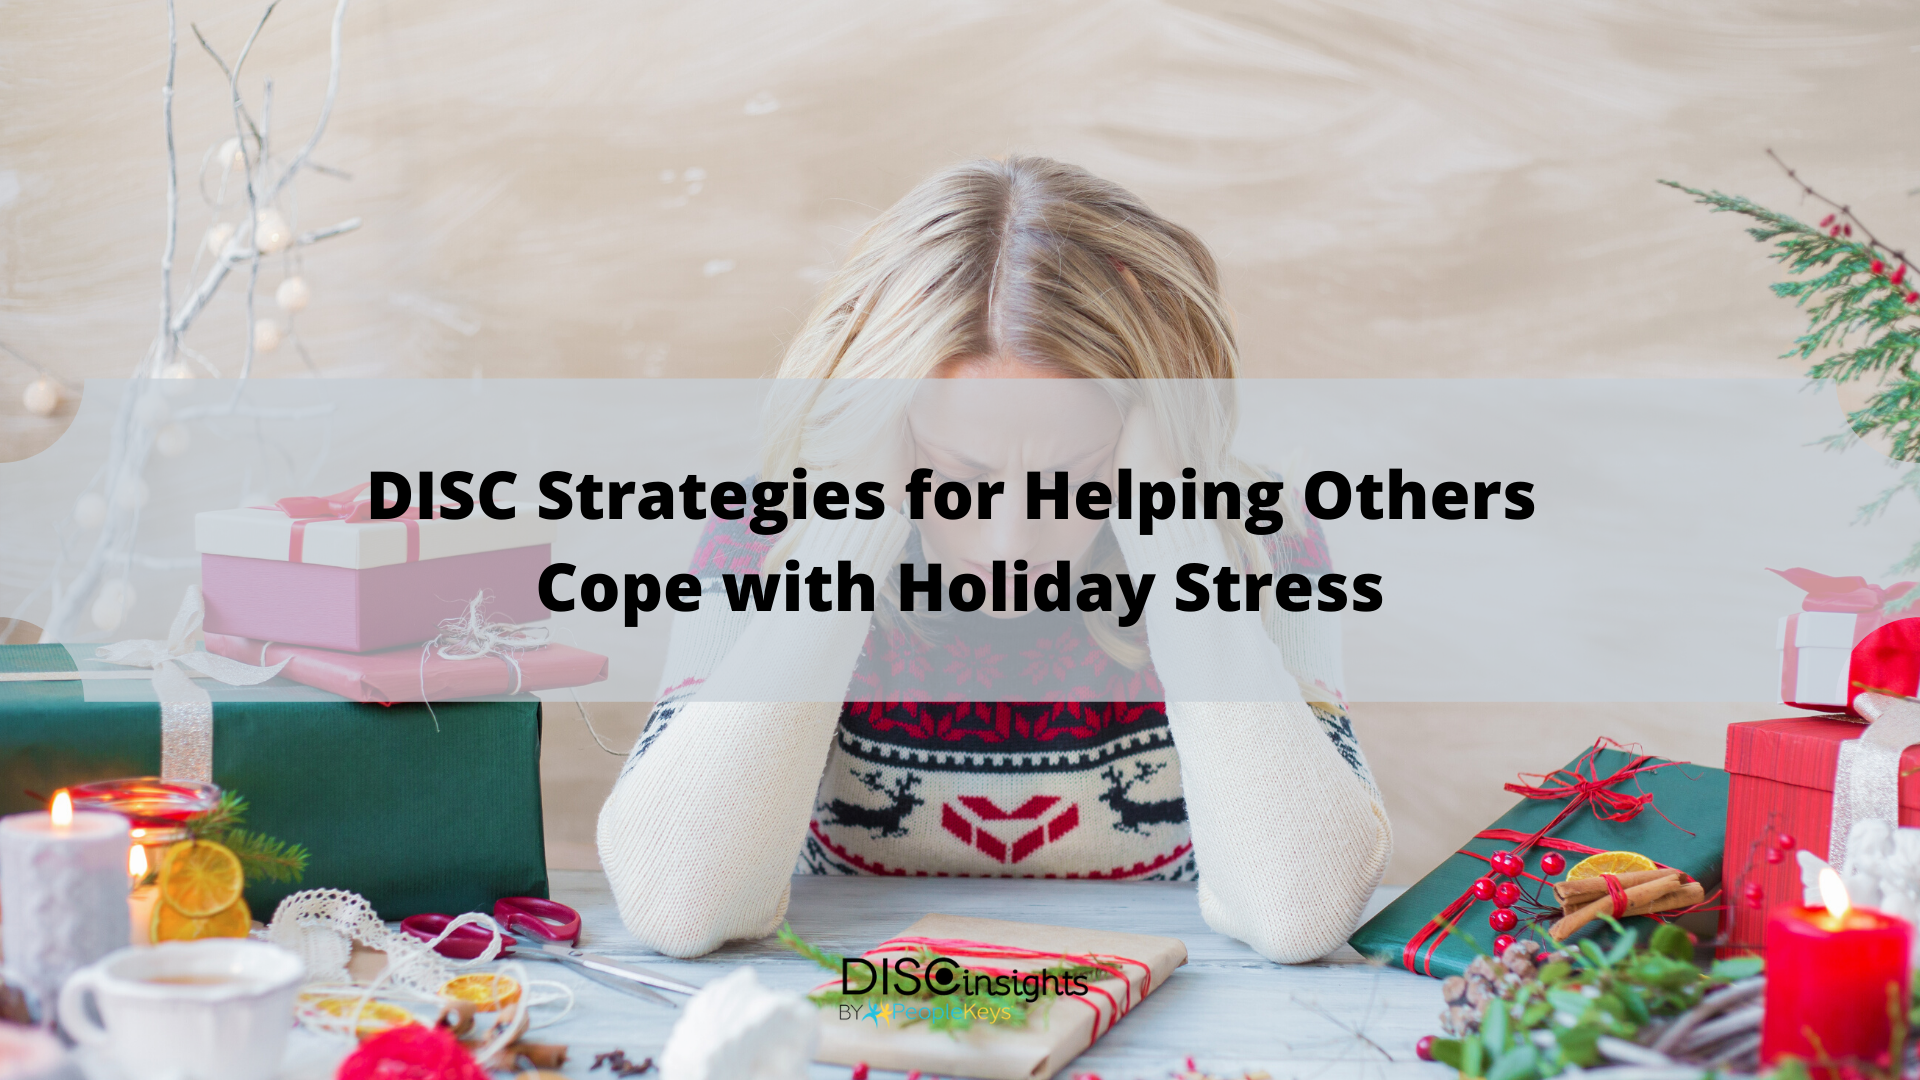 DISC Strategies for Helping Others Cope with Holiday Stress